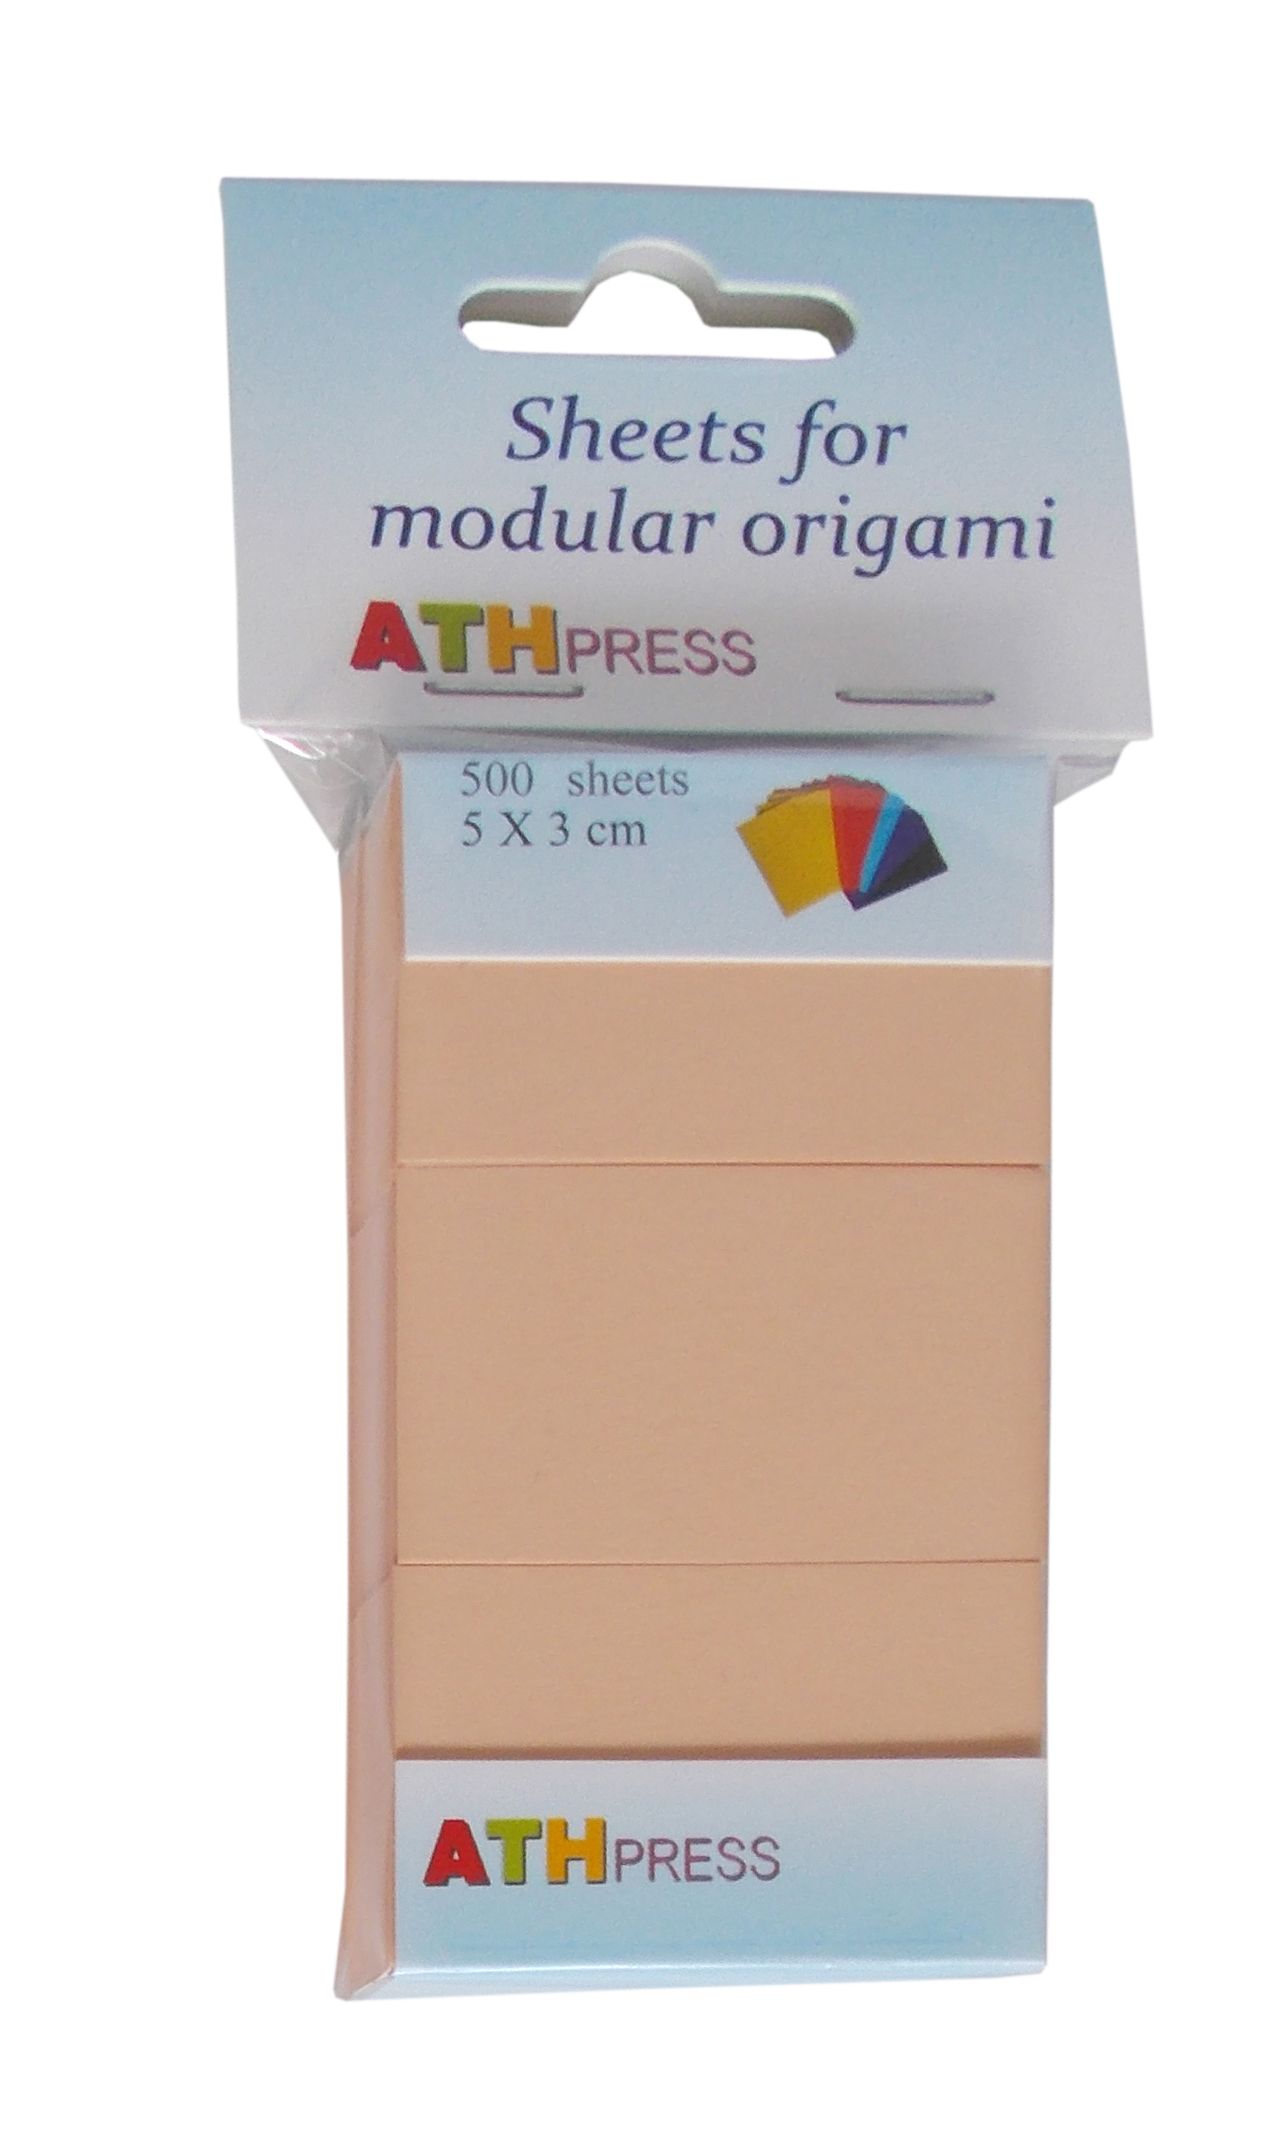 500 Sheets 5x3cm for 3D Origami - Chinese Modular - salmon pink